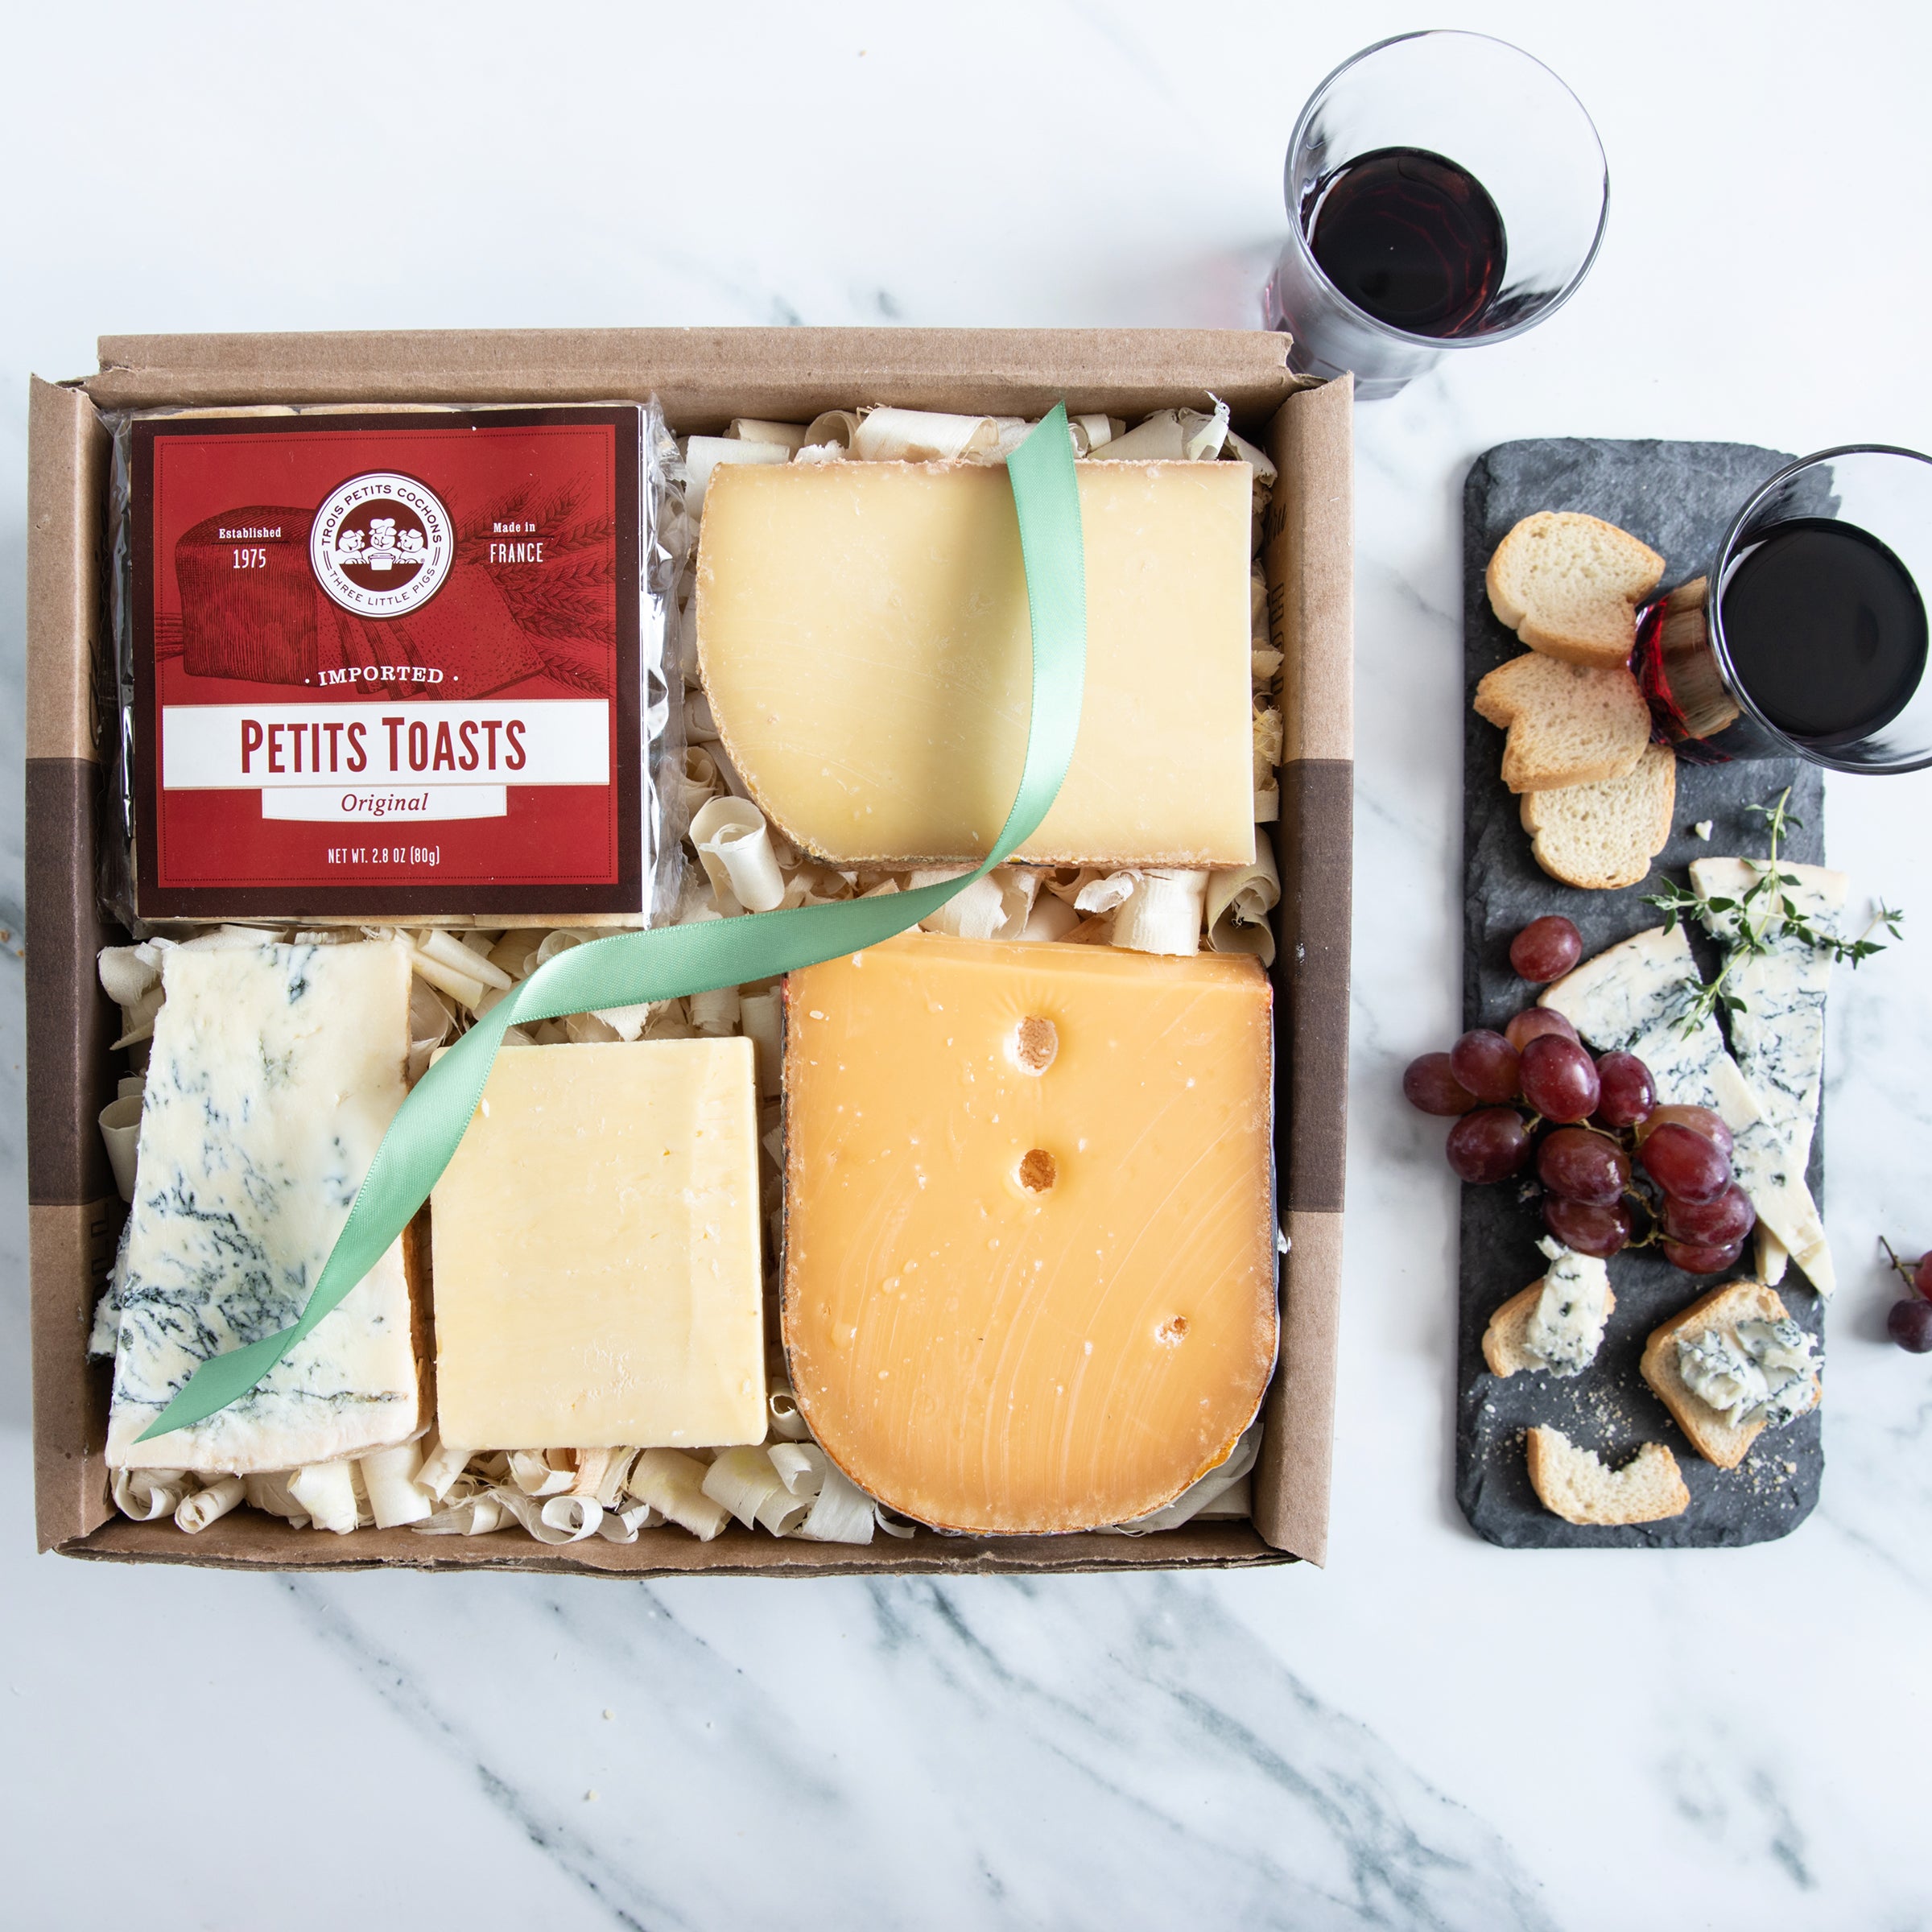 Igourmet 3 Pounds of Gourmet Cheese Favorites in Gift Basket - Box